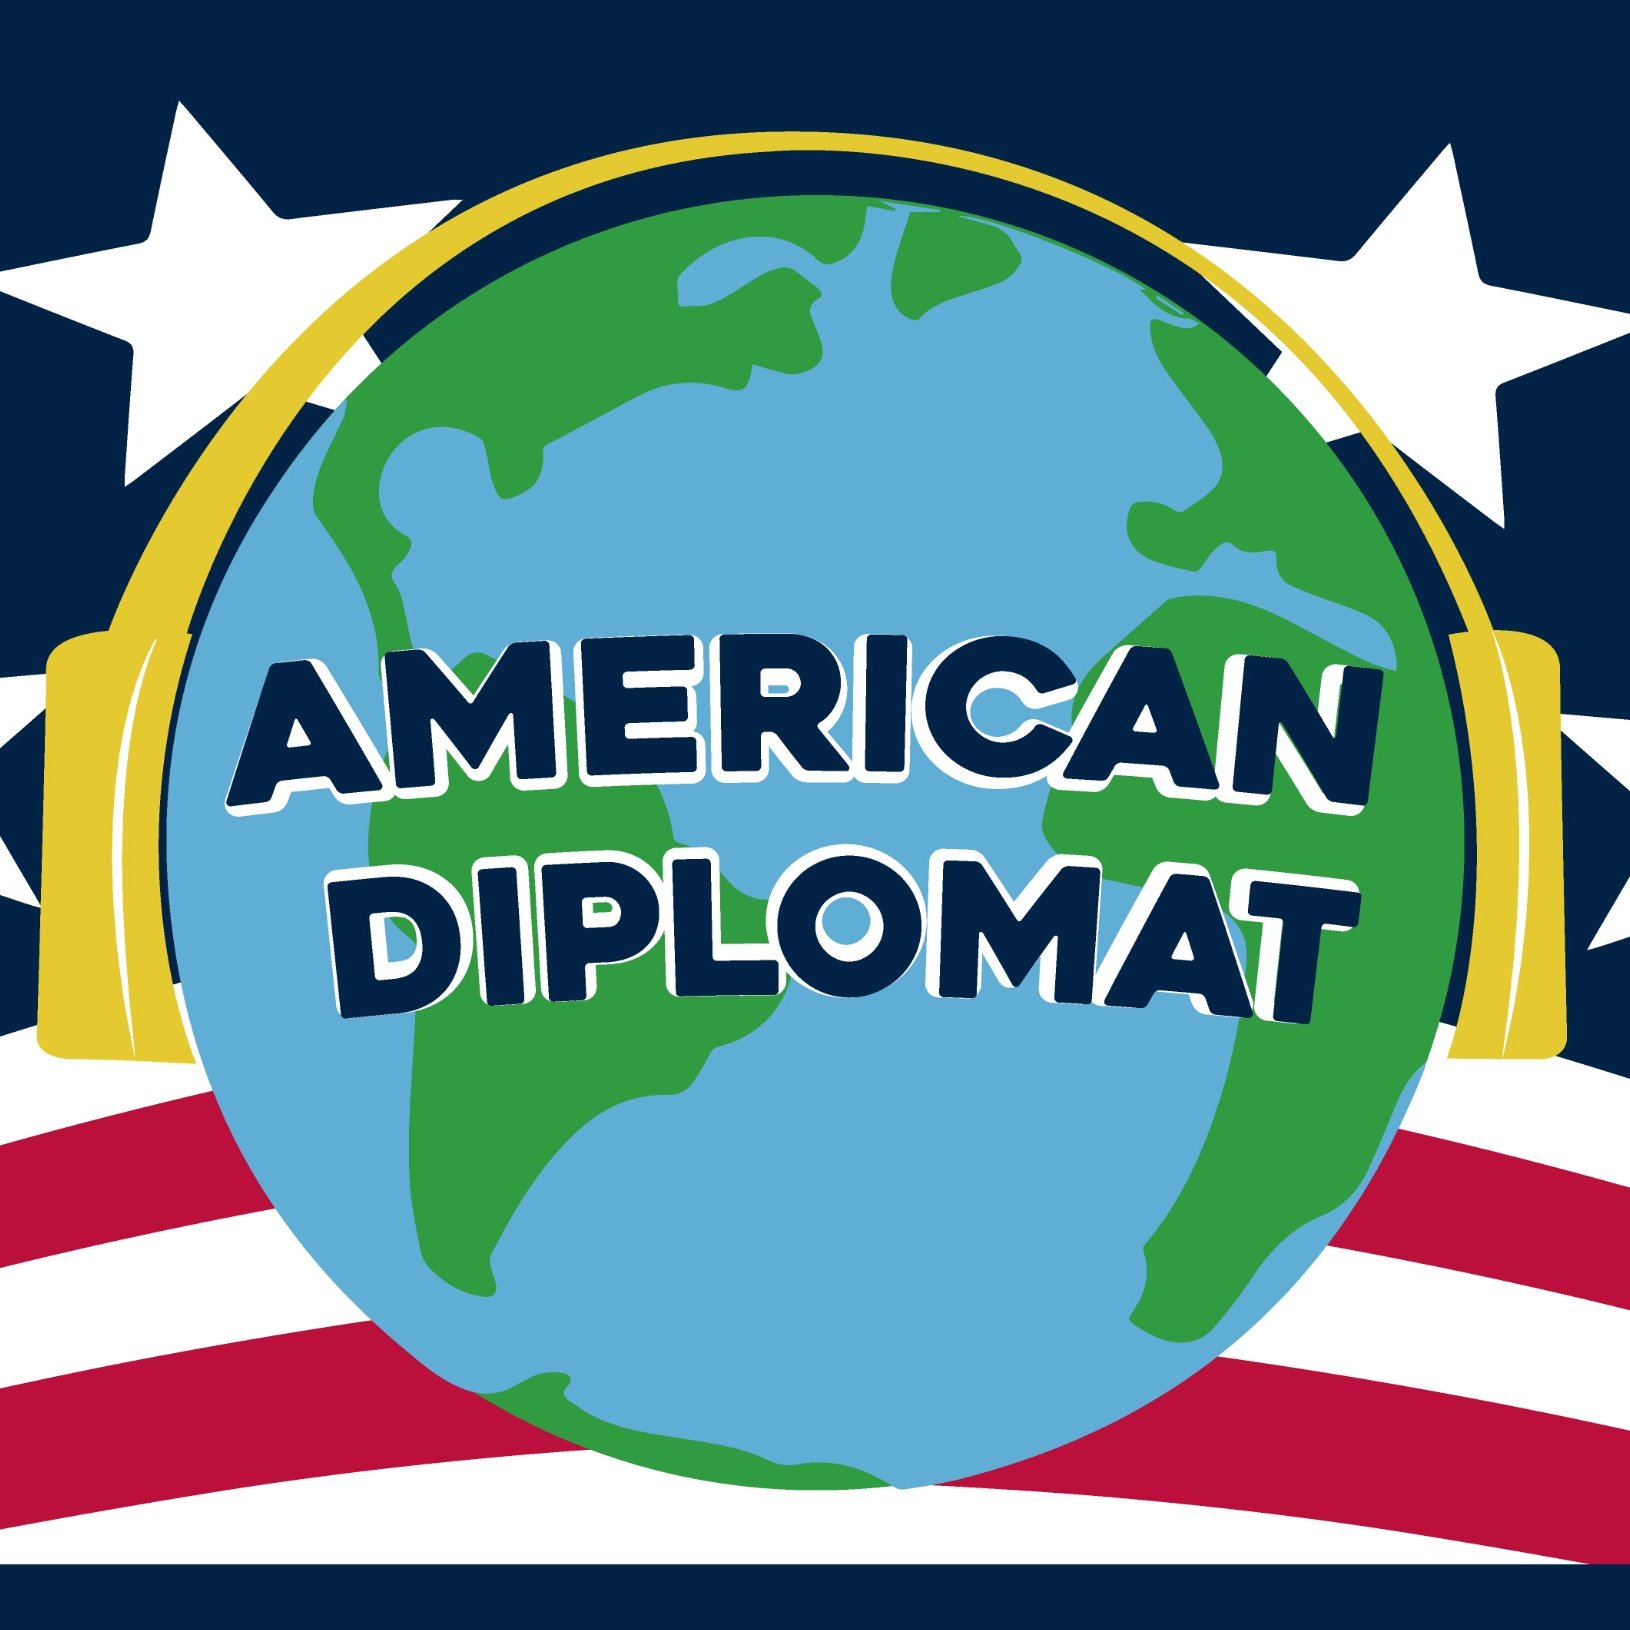 American Diplomat goes behind the scenes to hear real stories from diplomats who lived newsworthy events overseas.